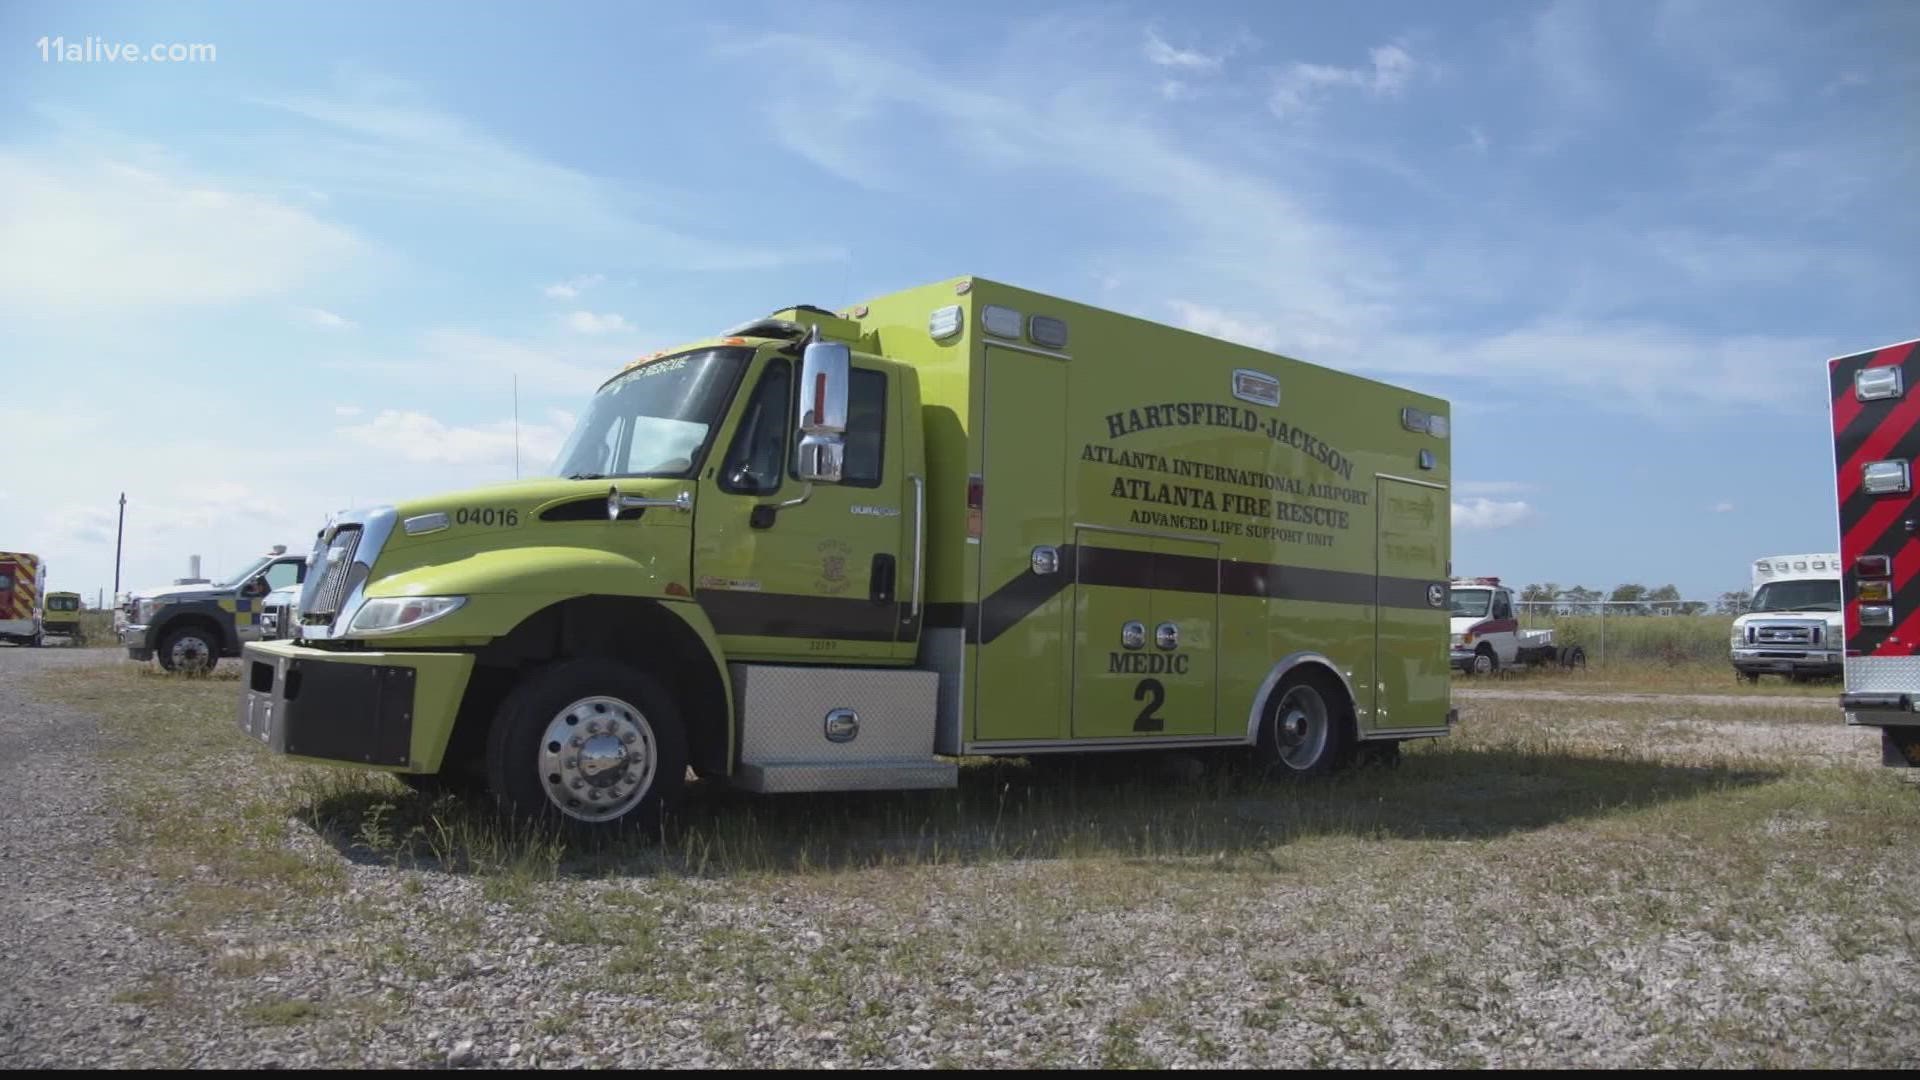 An 11 Alive investigation has revealed that multiple Hartsfield-Jackson Airport ambulances have been found in Ohio.